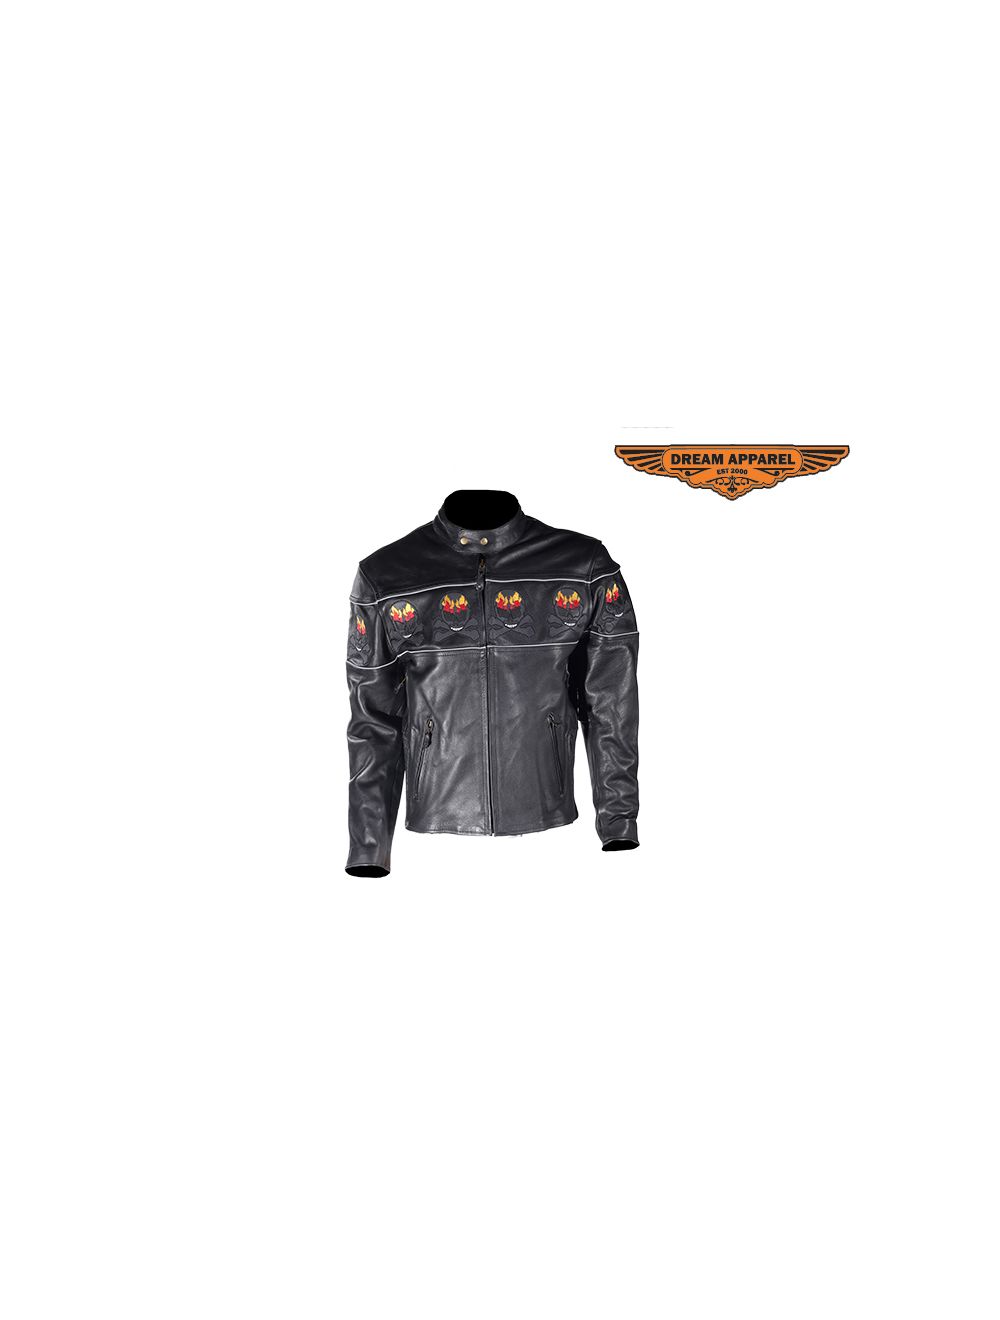 Mens Black Racer Leather Motorcycle Jacket With Flaming Skulls